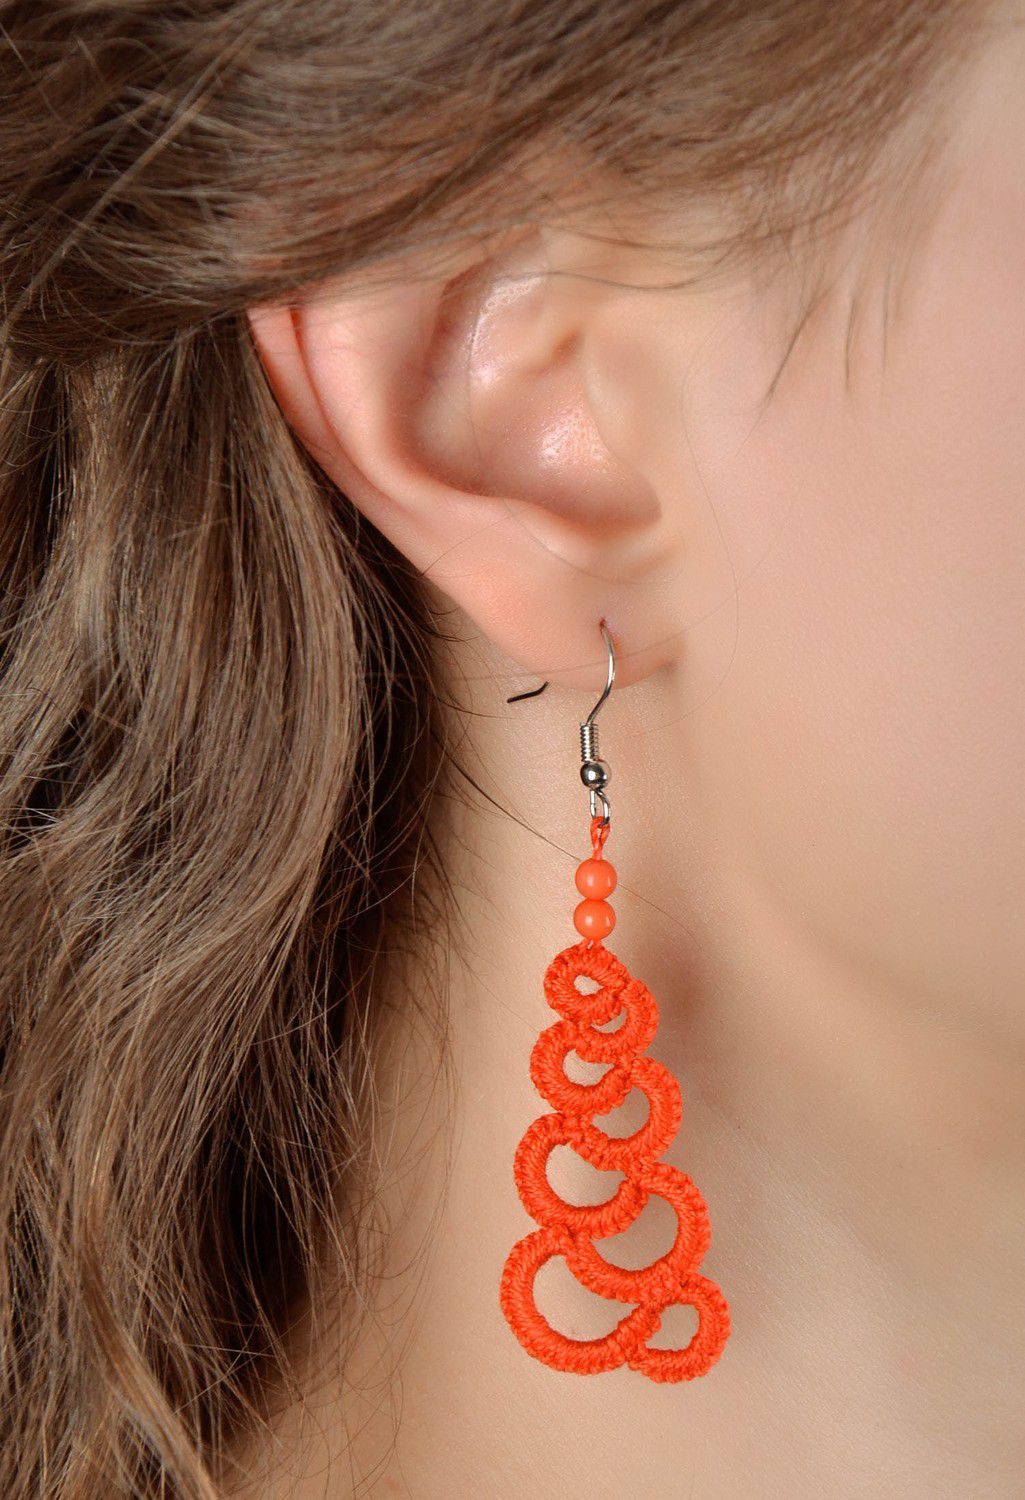 Coral earrings made from woven lace photo 4